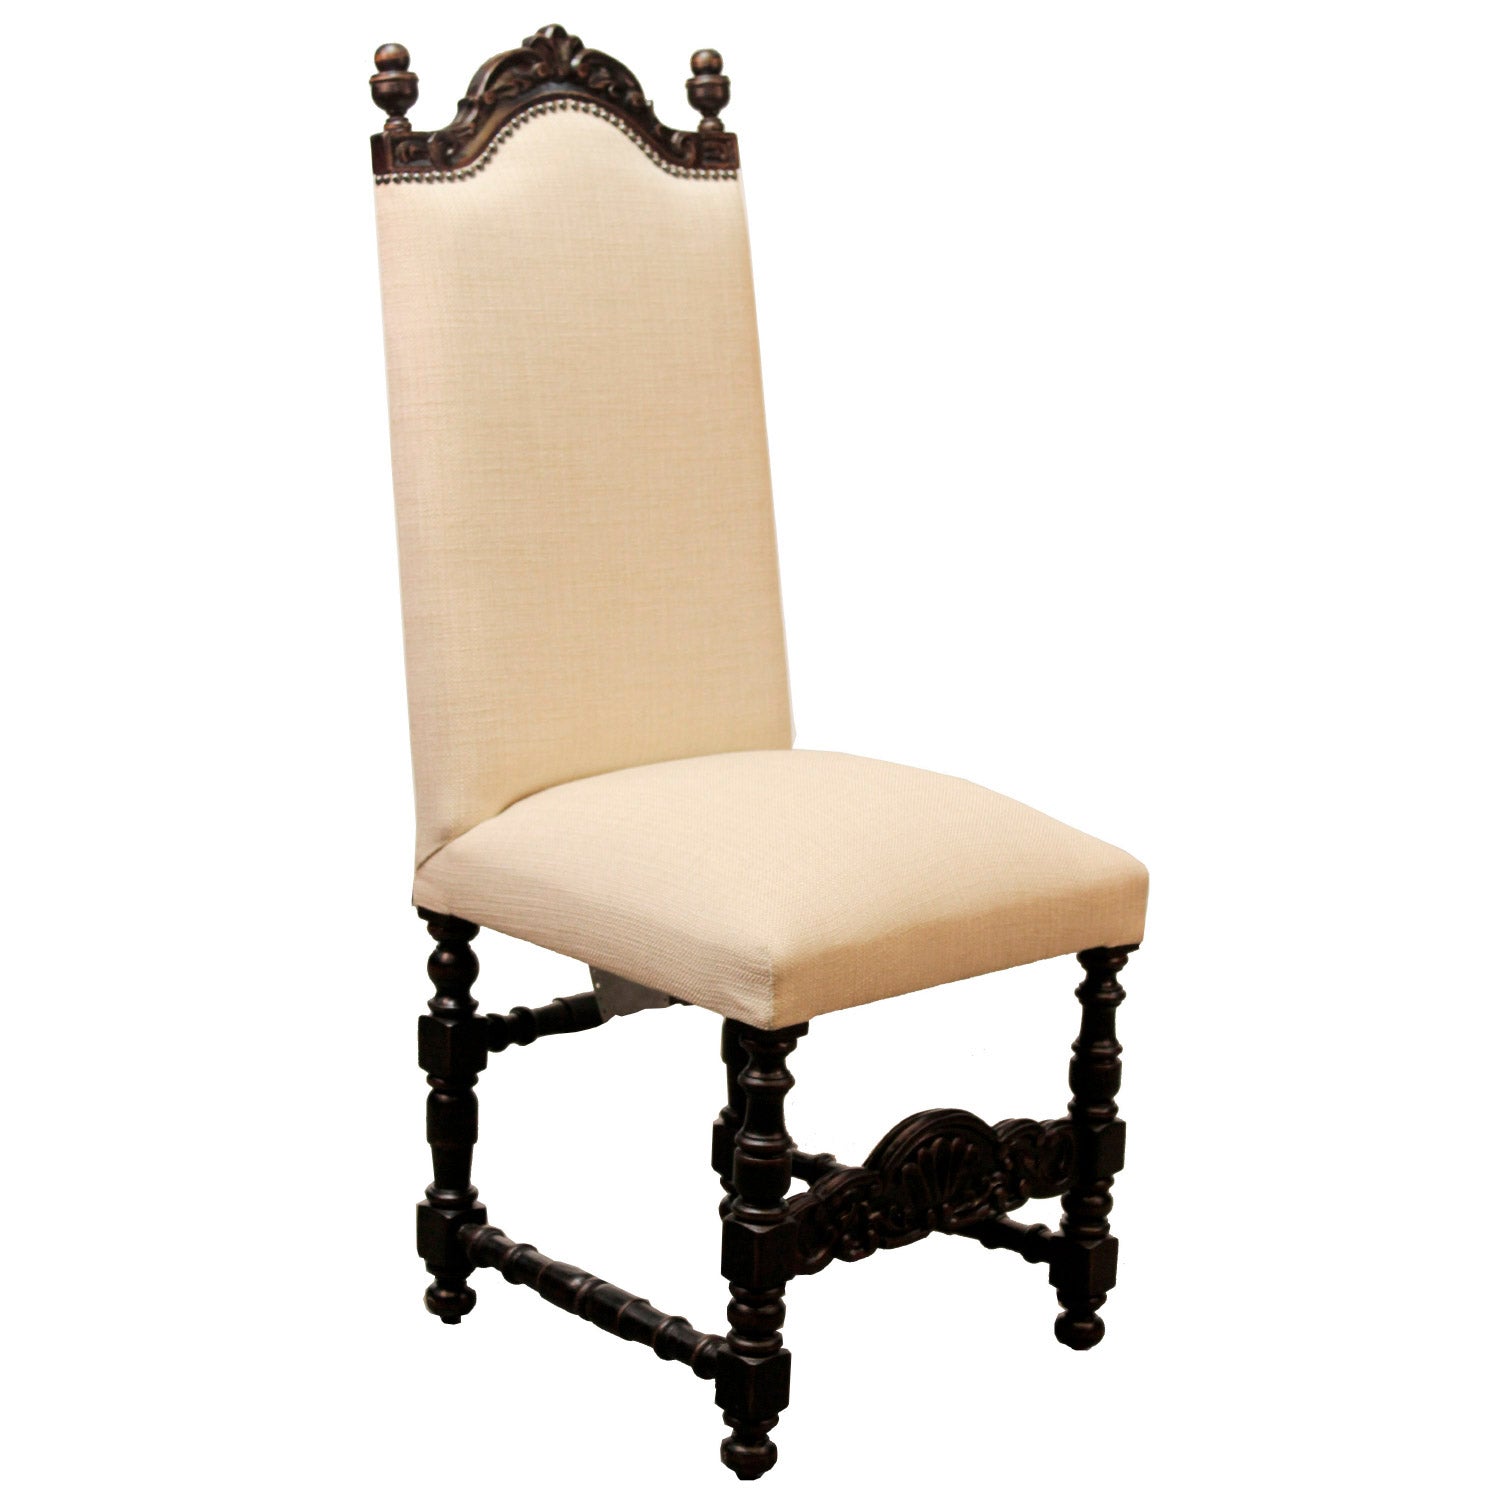 Grand Viceroy Dining Chair